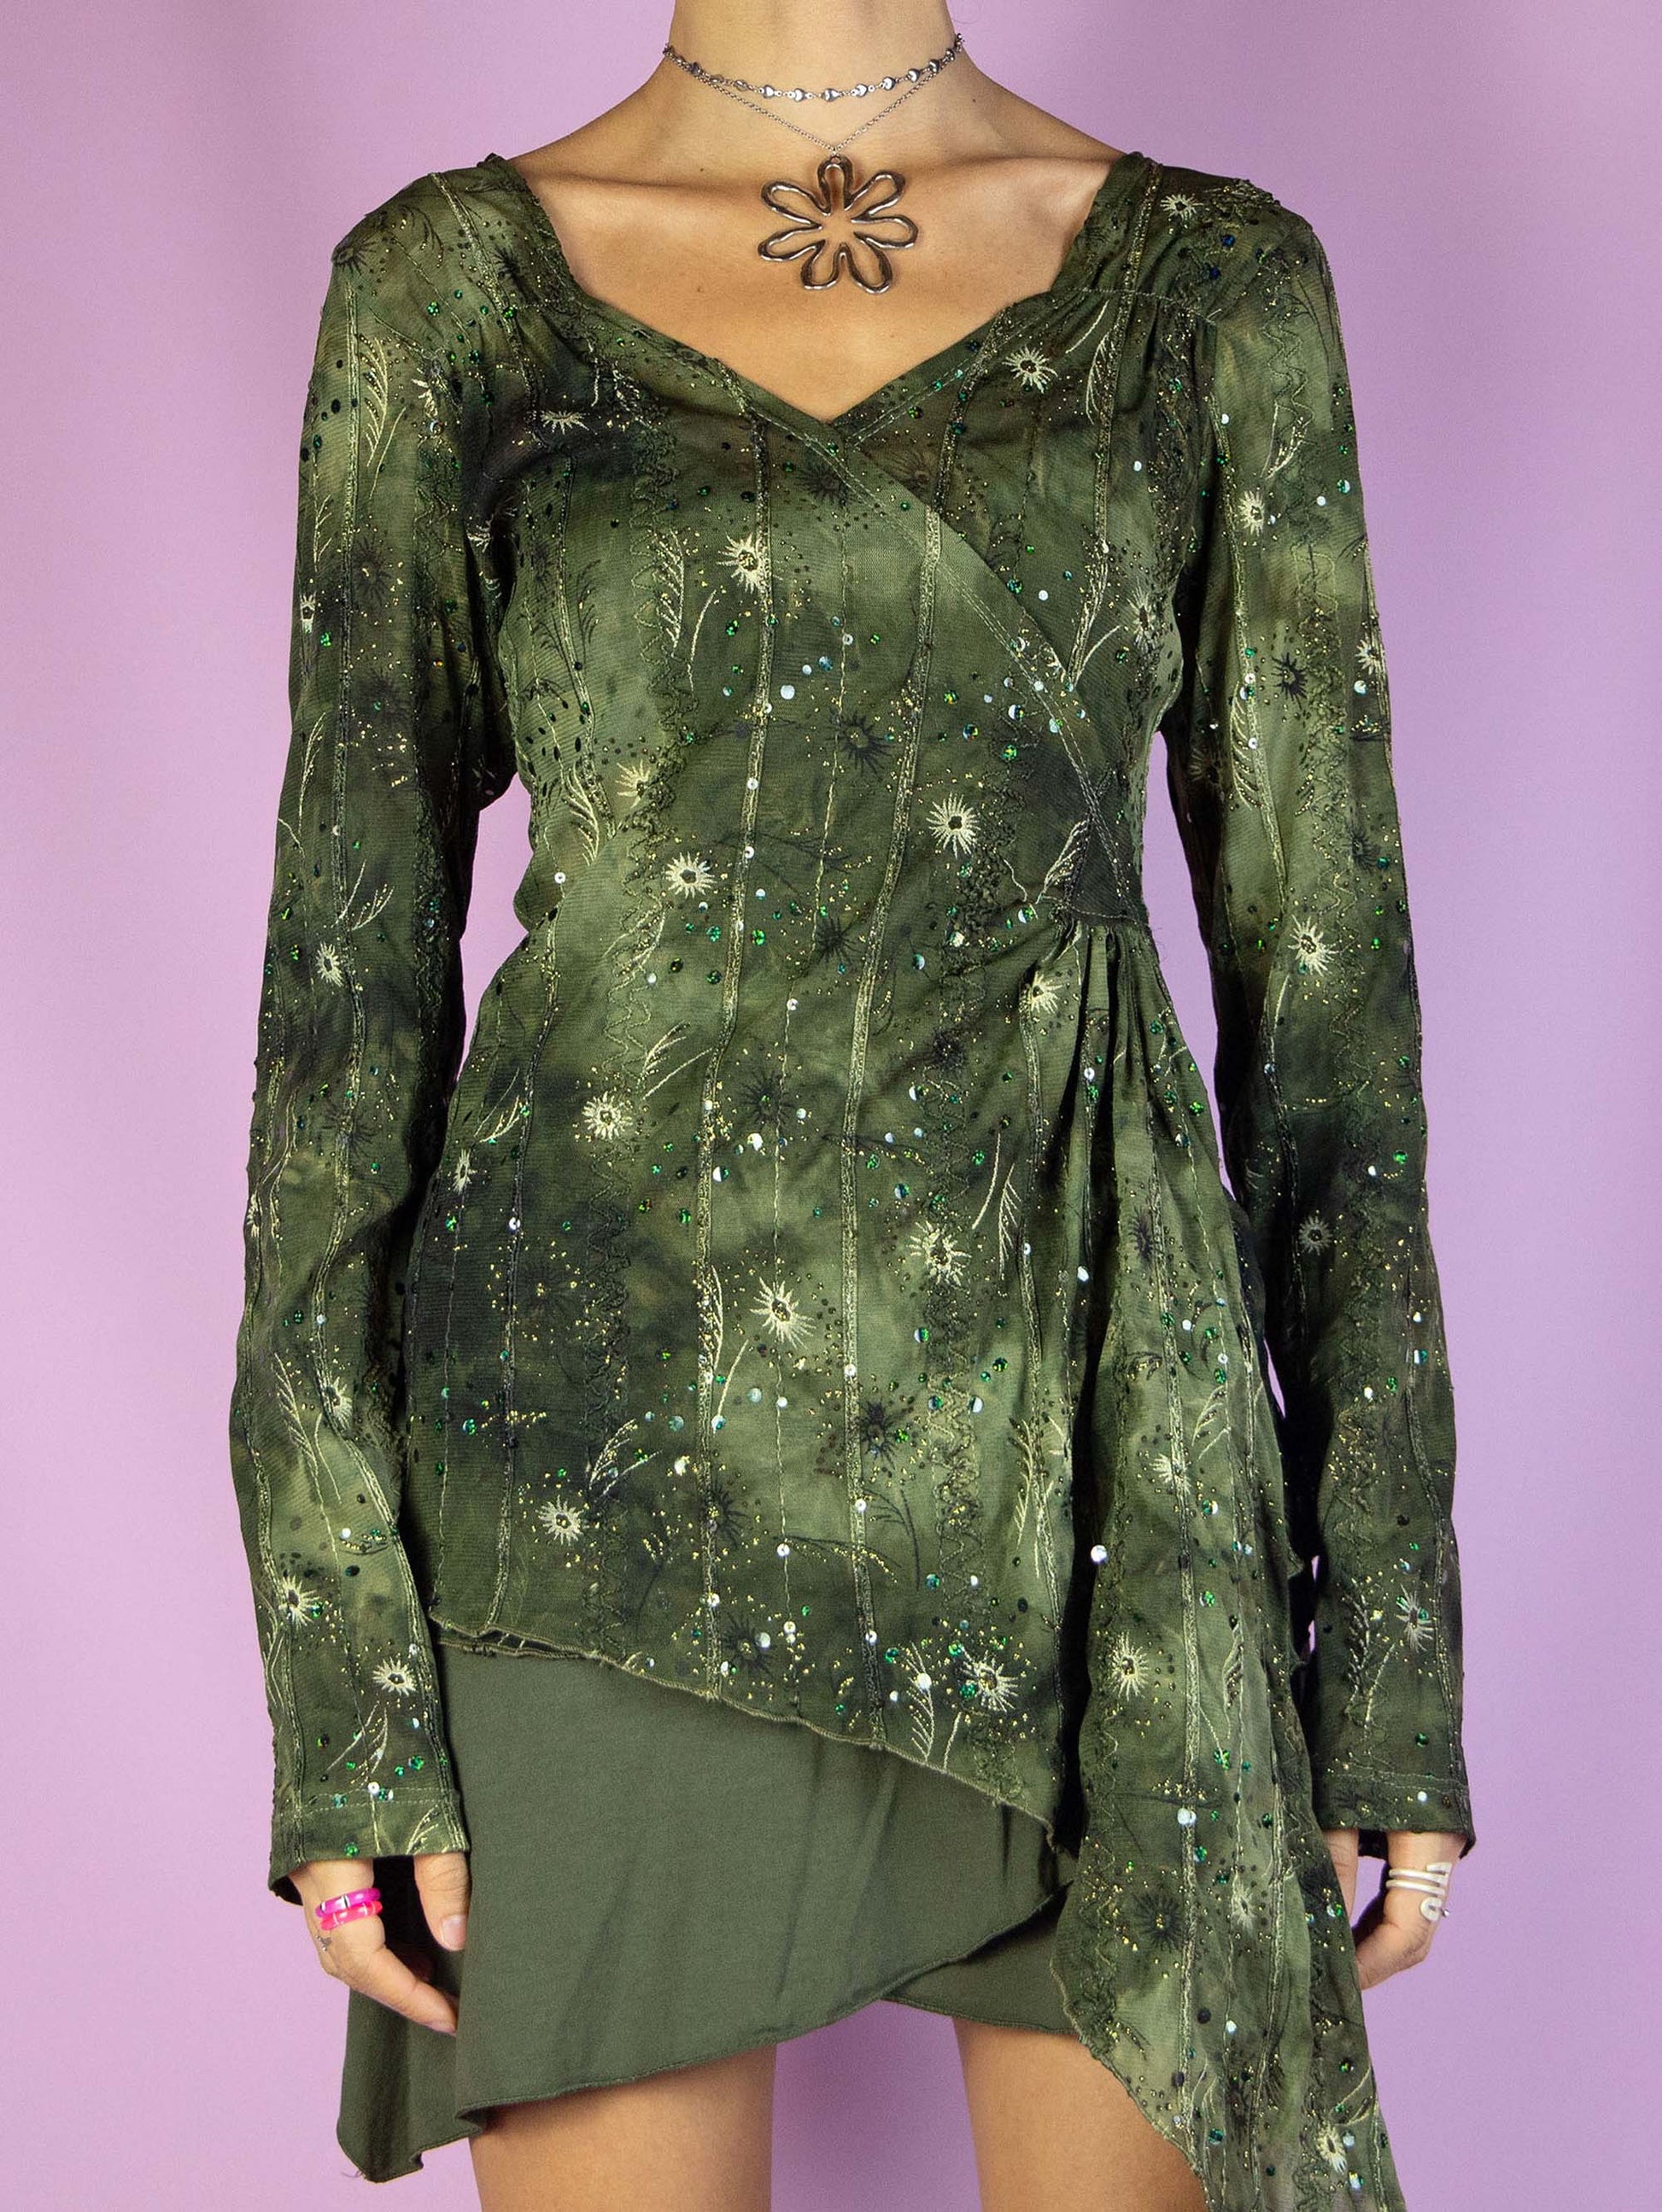 The Y2K Fairy Grunge Mesh Top is a vintage long-sleeved asymmetrical draped mesh shirt in green tie-dye effect with embroidered, glitter, and sequin details. Stunning cyber festival rave 2000s shirt.